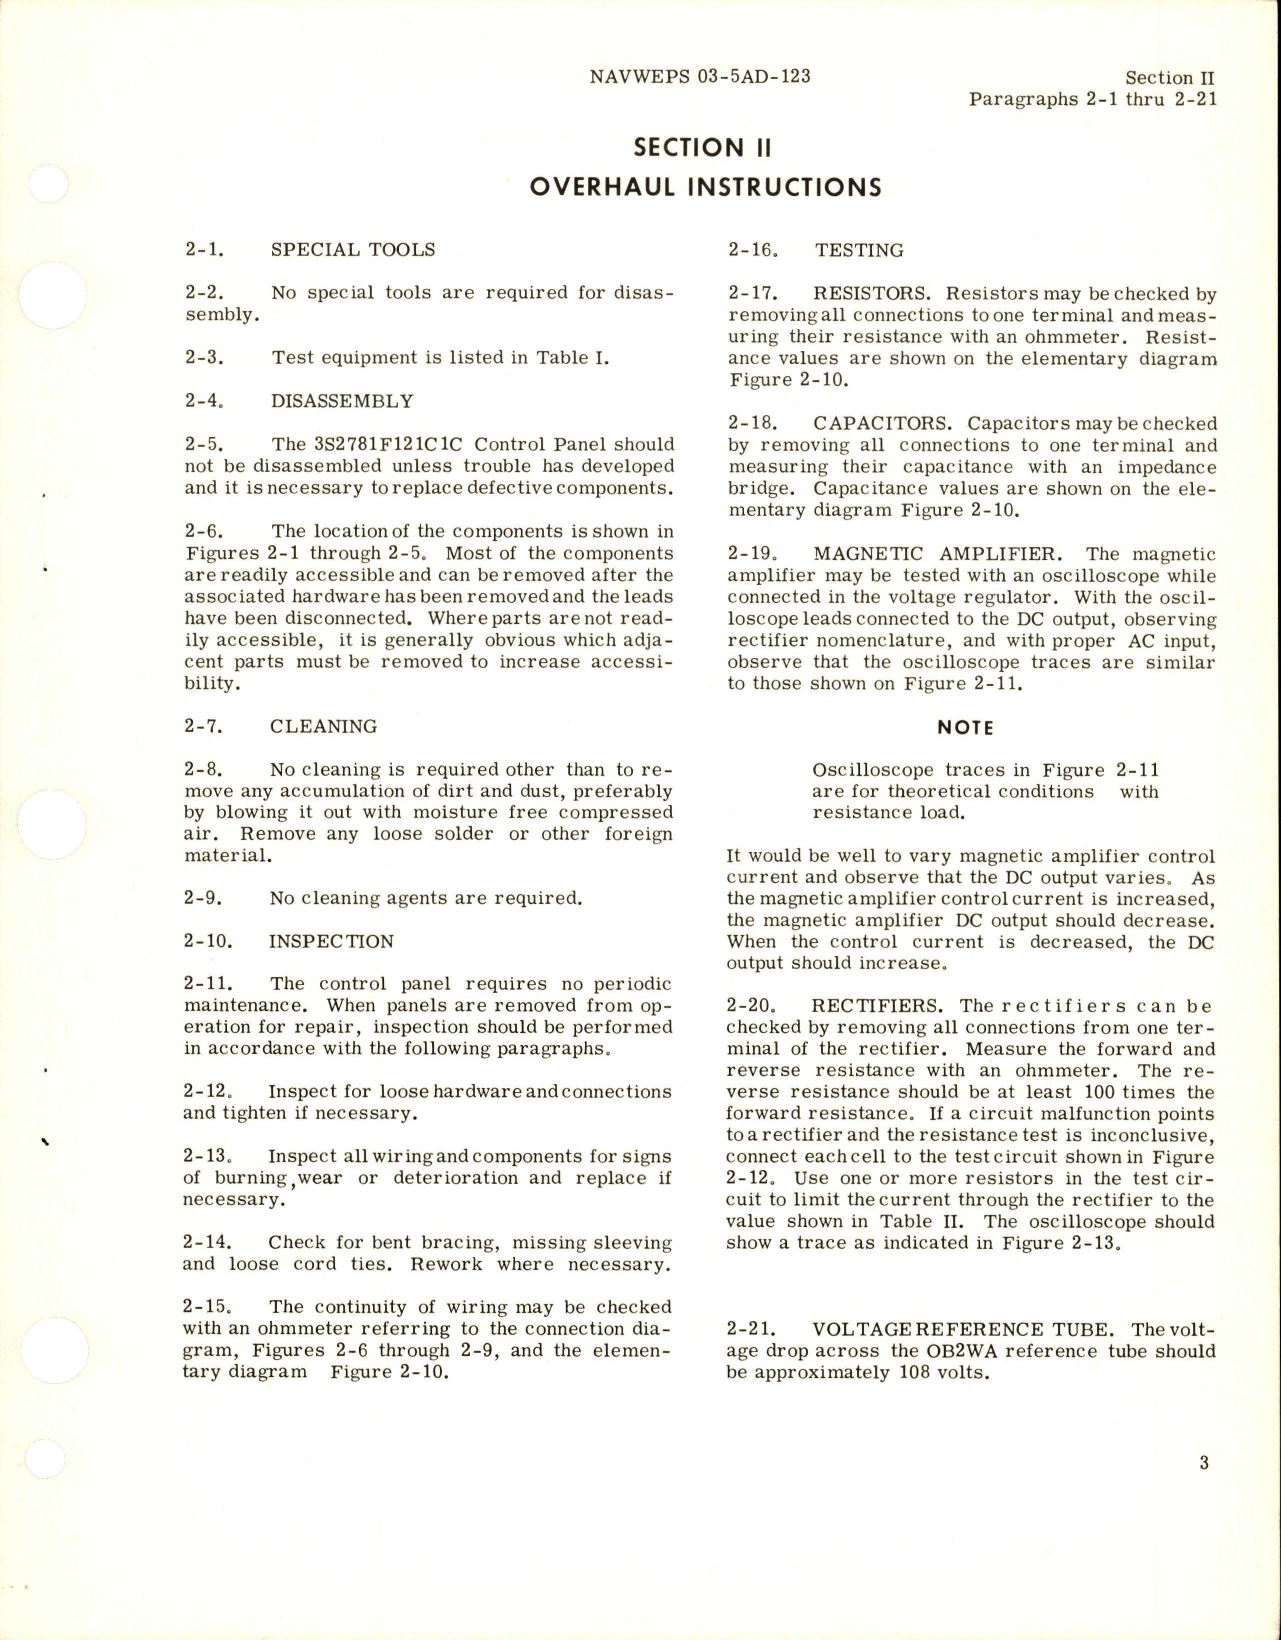 Sample page 7 from AirCorps Library document: Overhaul Instructions for Control Panel - Model 3S2781F121C1C 